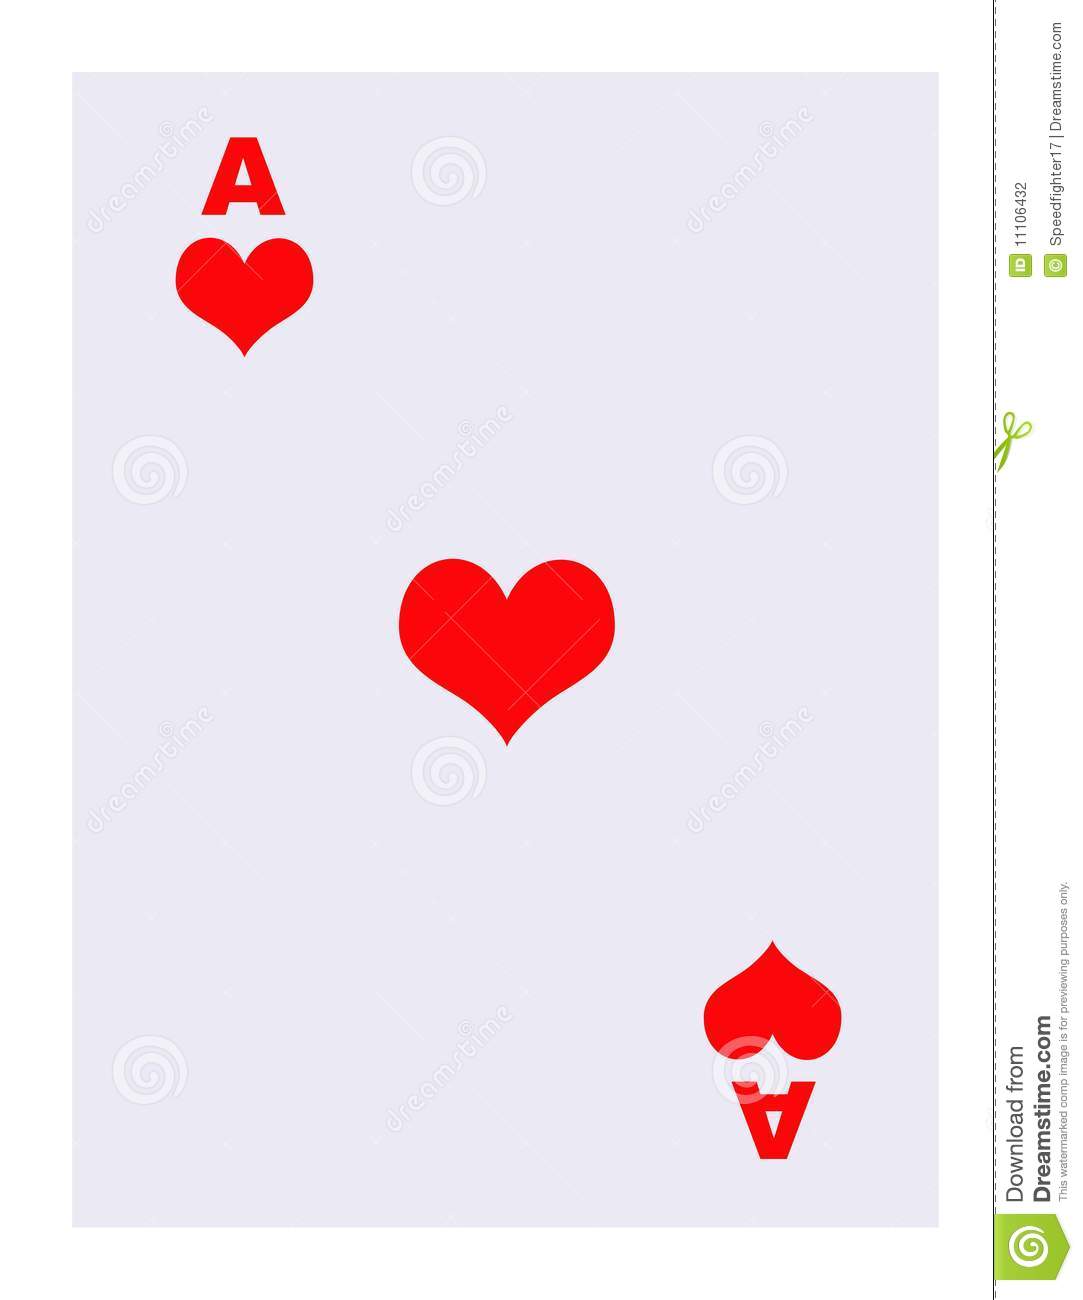 Ace Of Hearts Playing Card Stock Photography   Image  11106432